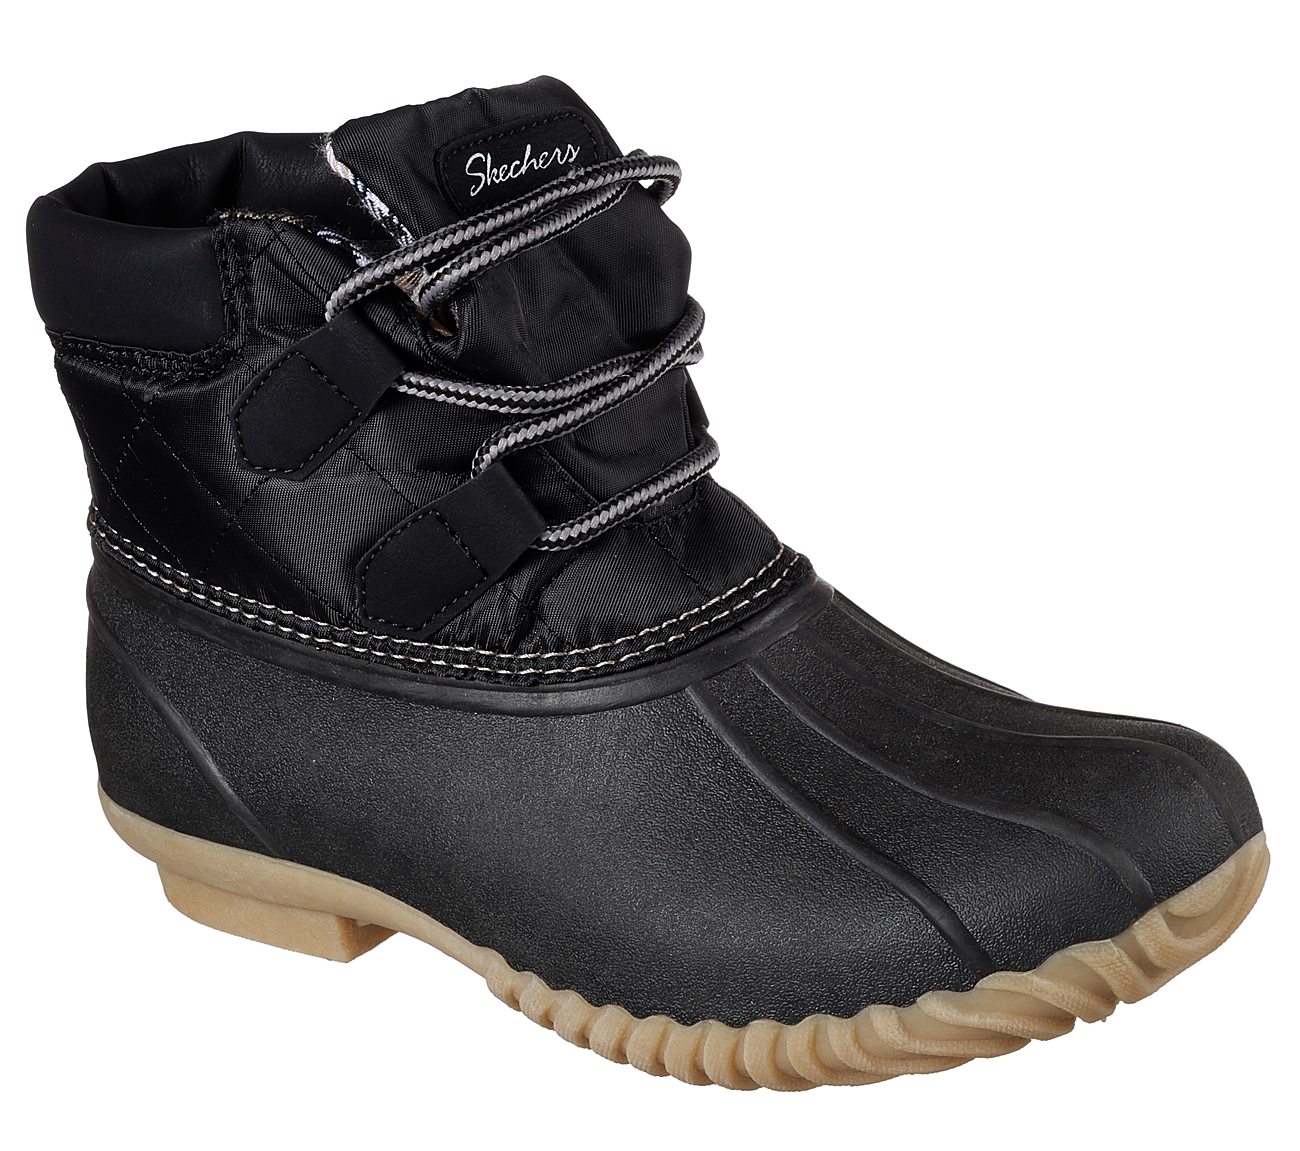 skechers hampshire duck boots off 72 